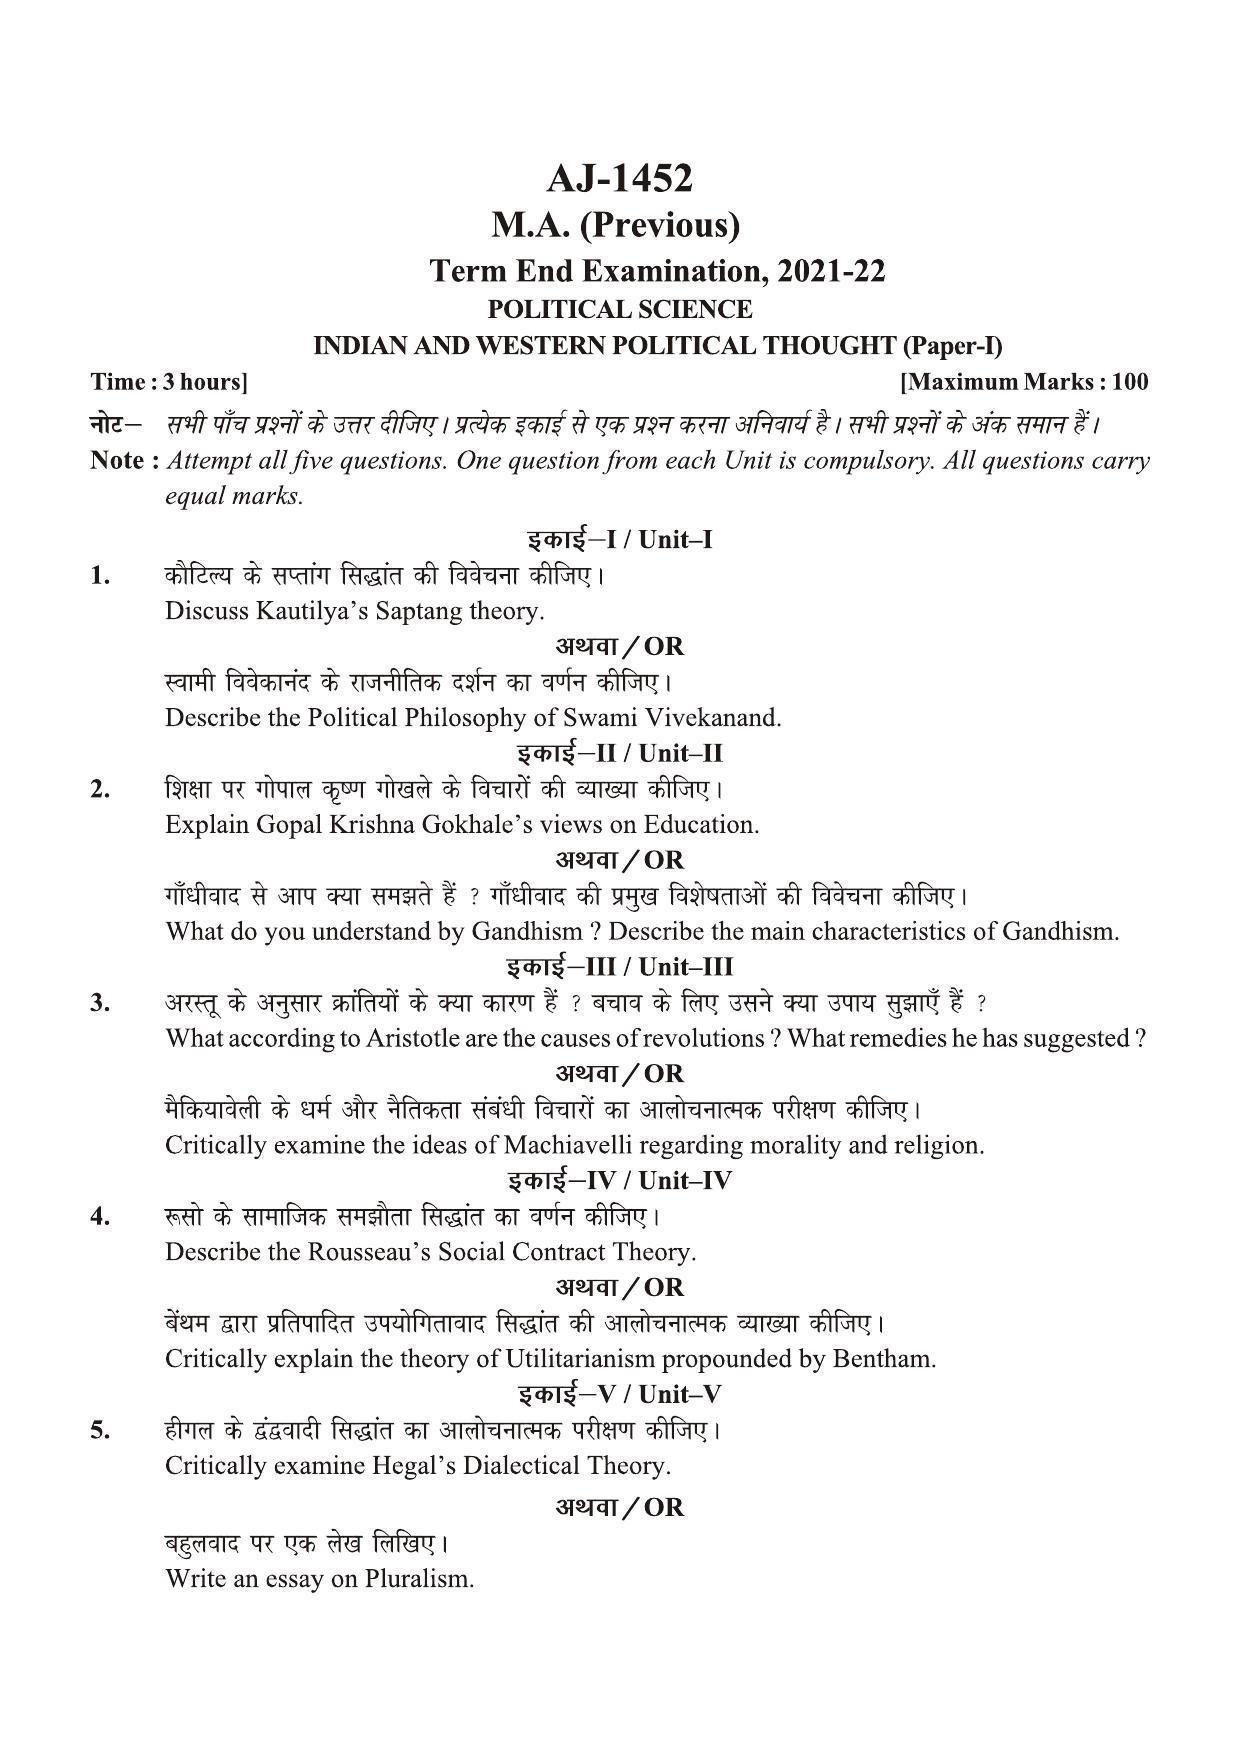 Bilaspur University Question Paper 2021-2022:M.A (Previous) Political Science Indian & Western Political Thought Paper 1 - Page 1